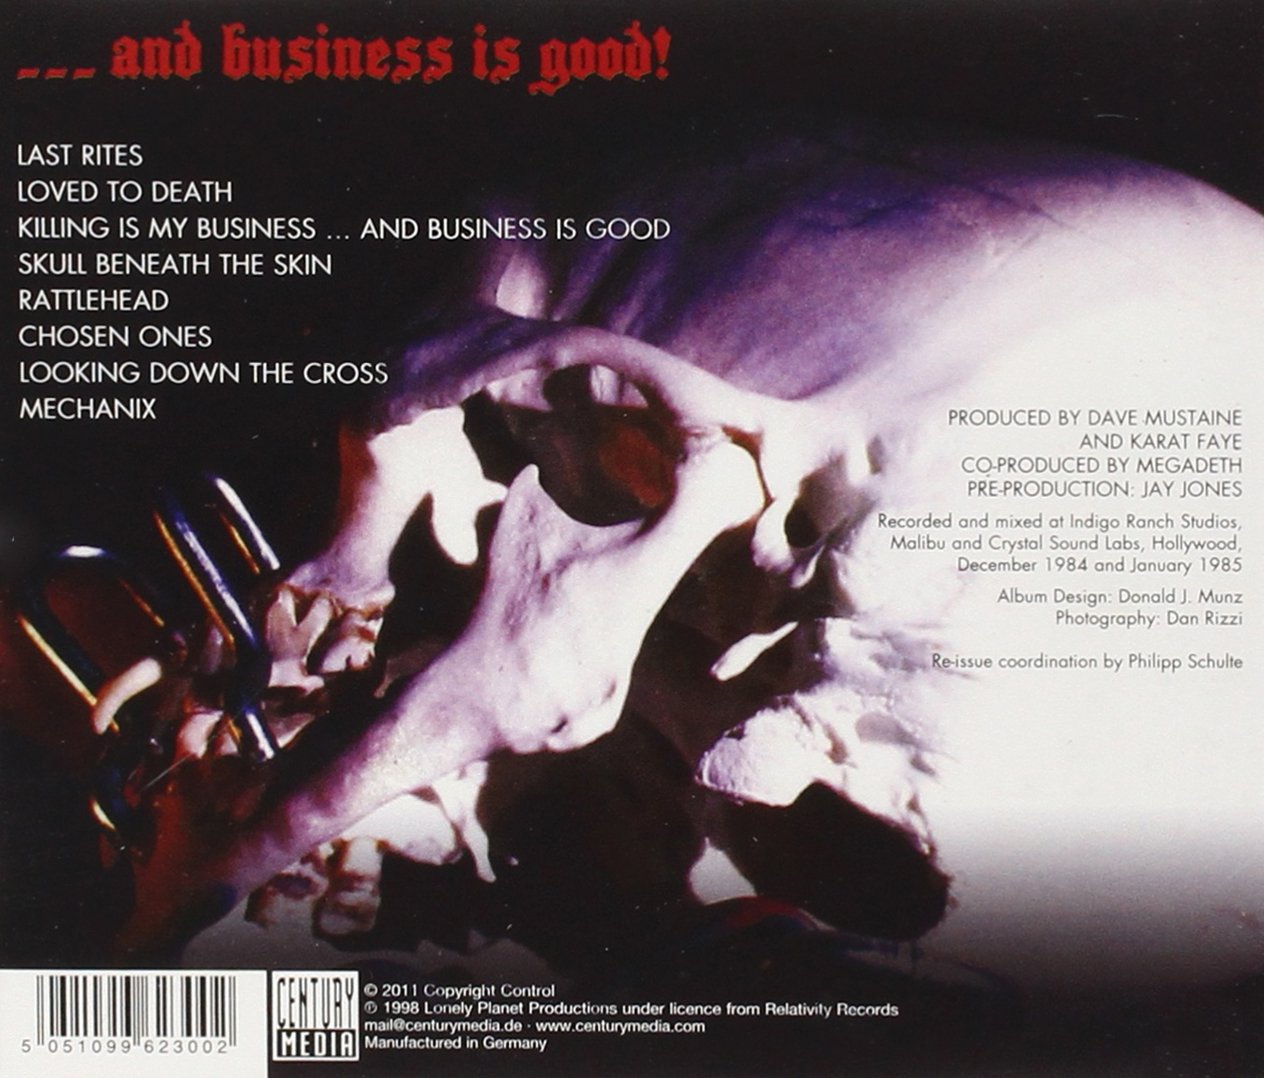 Megadeth - Killing Is My Business... and Business Is Good! 